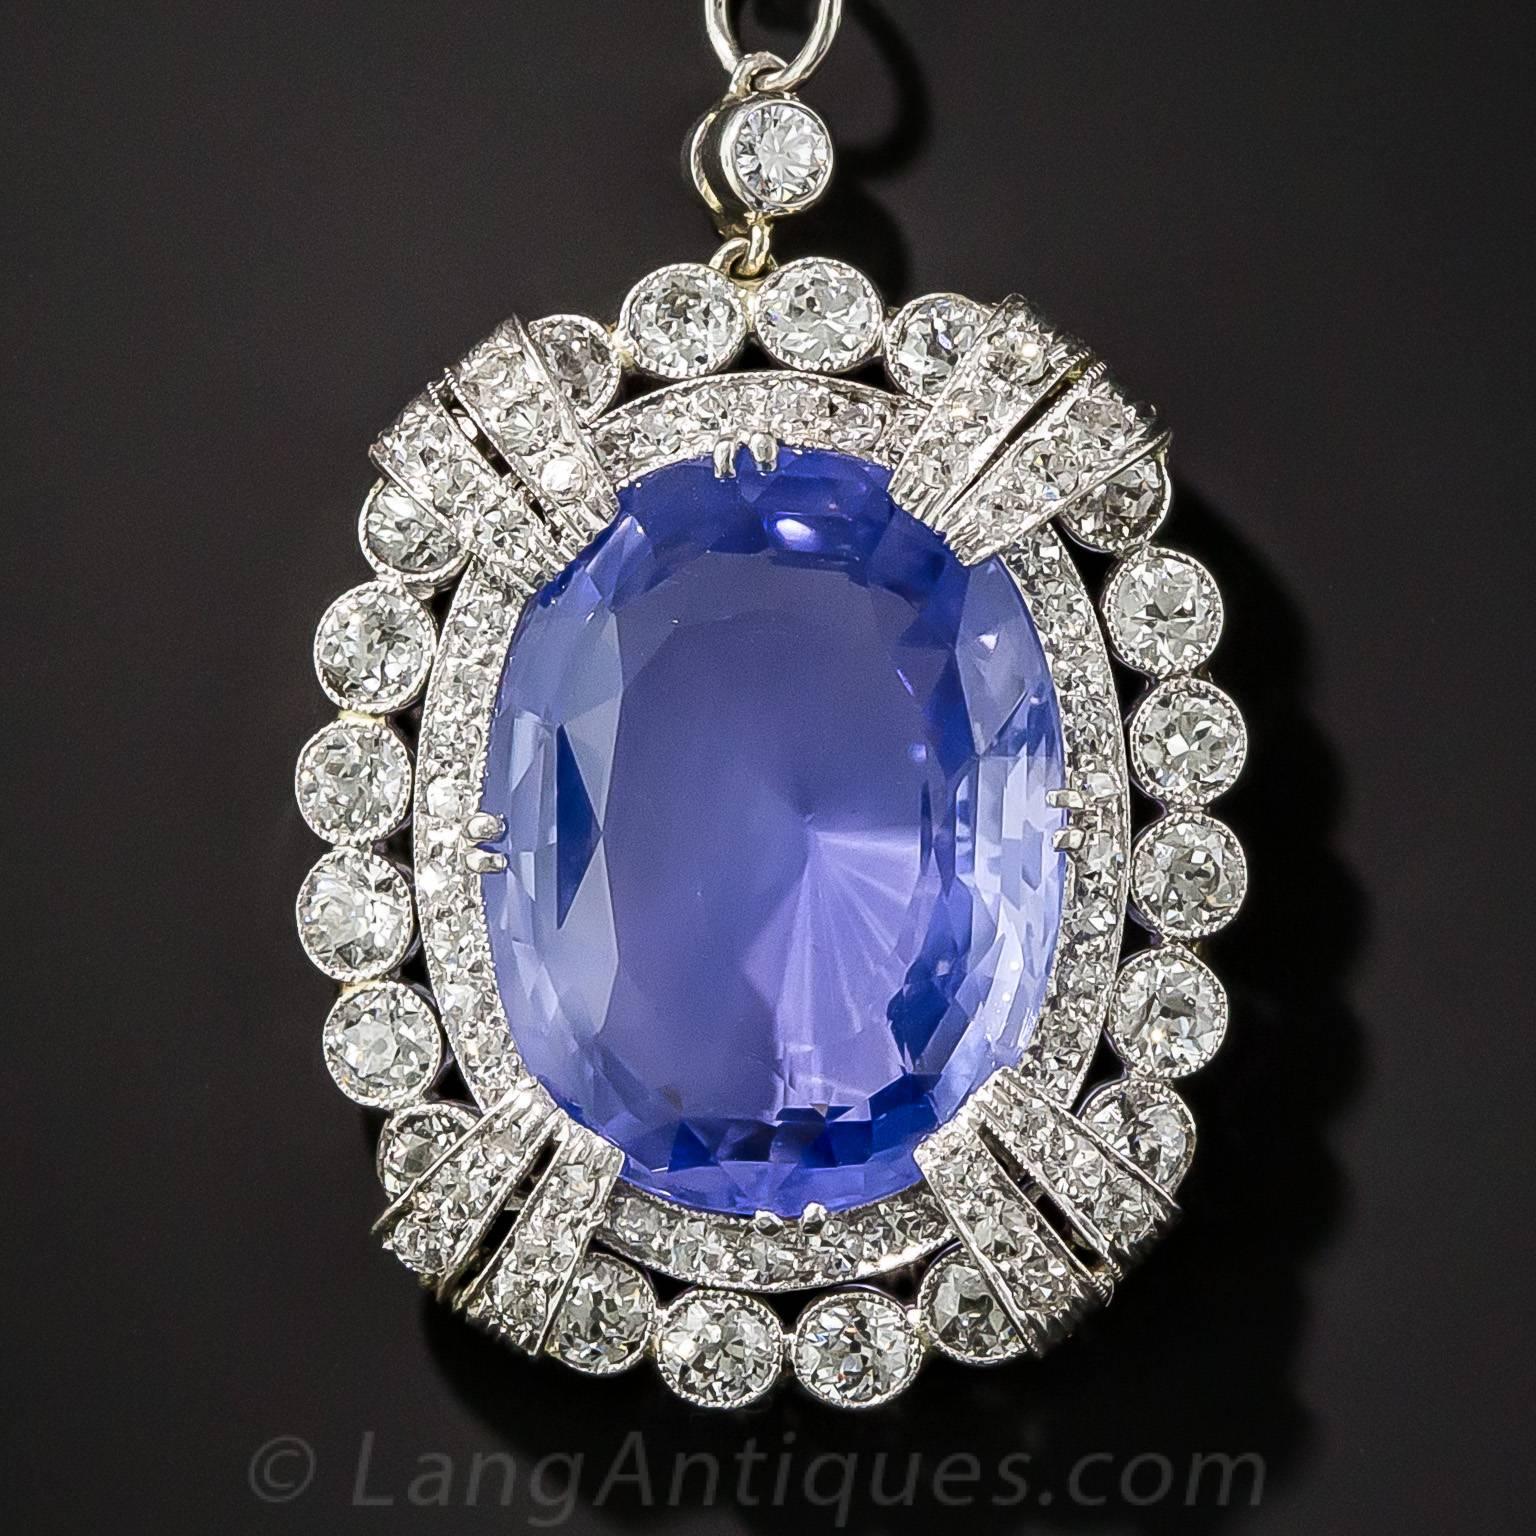 This regal Art Deco showstopper, dating from the 1920s, magnificently displays a crystalline, cornflower blue, natural, no-heat Ceylon sapphire, presenting about double the size of its (measured) 15.65 carat weight. The impressive and enchanting